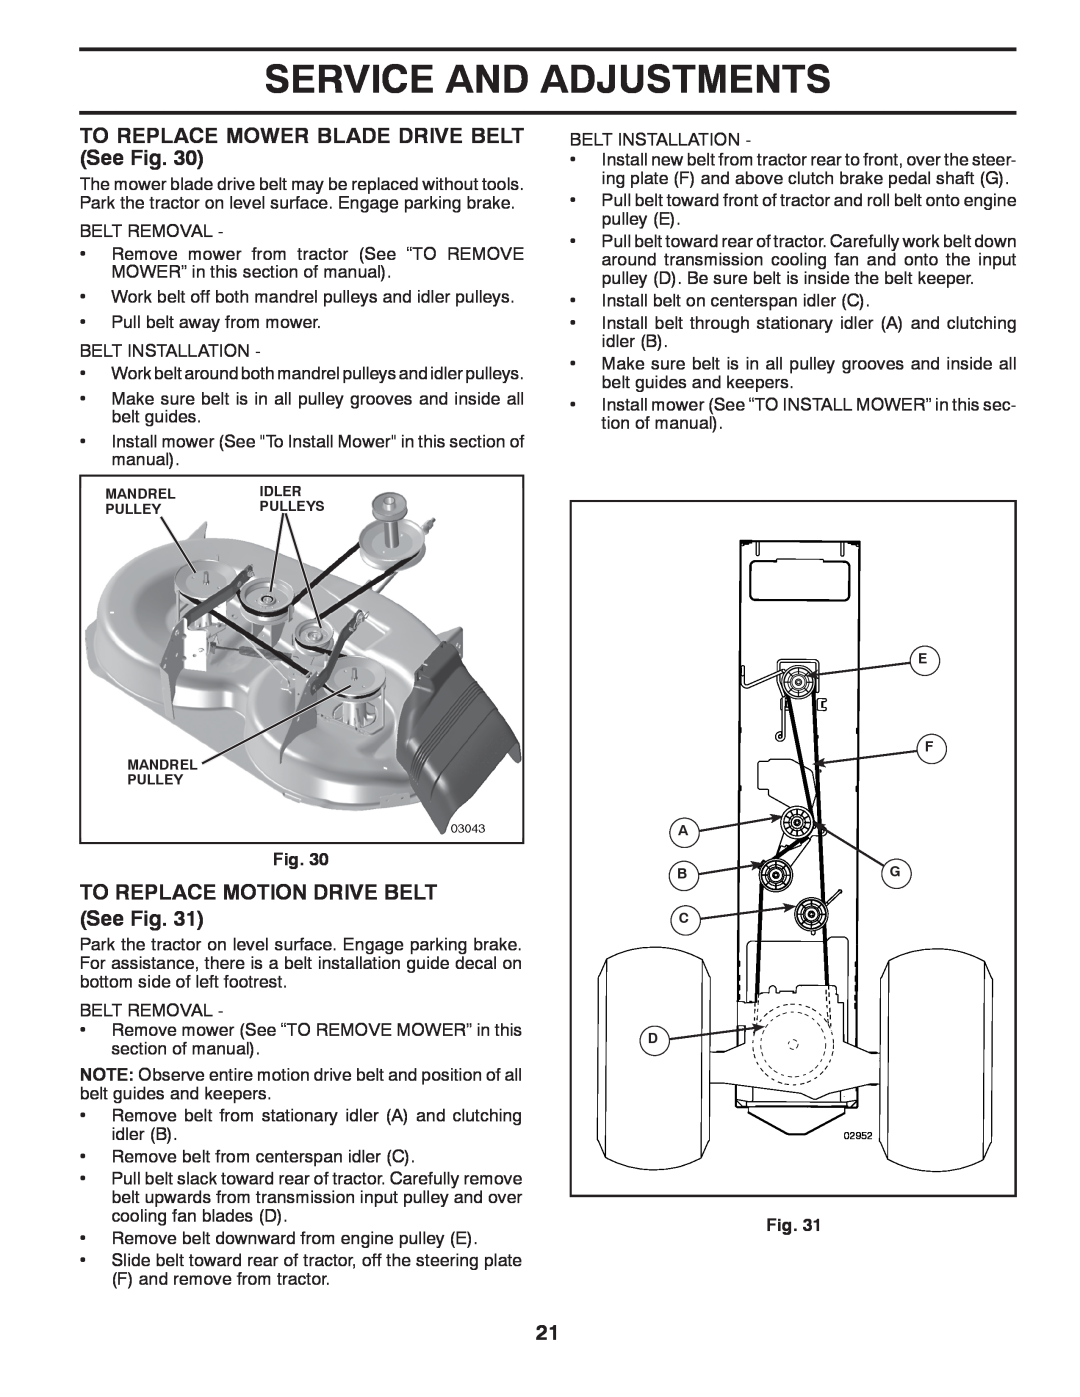 Husqvarna 917.289541 owner manual TO REPLACE MOWER BLADE DRIVE BELT See Fig, TO REPLACE MOTION DRIVE BELT See Fig 